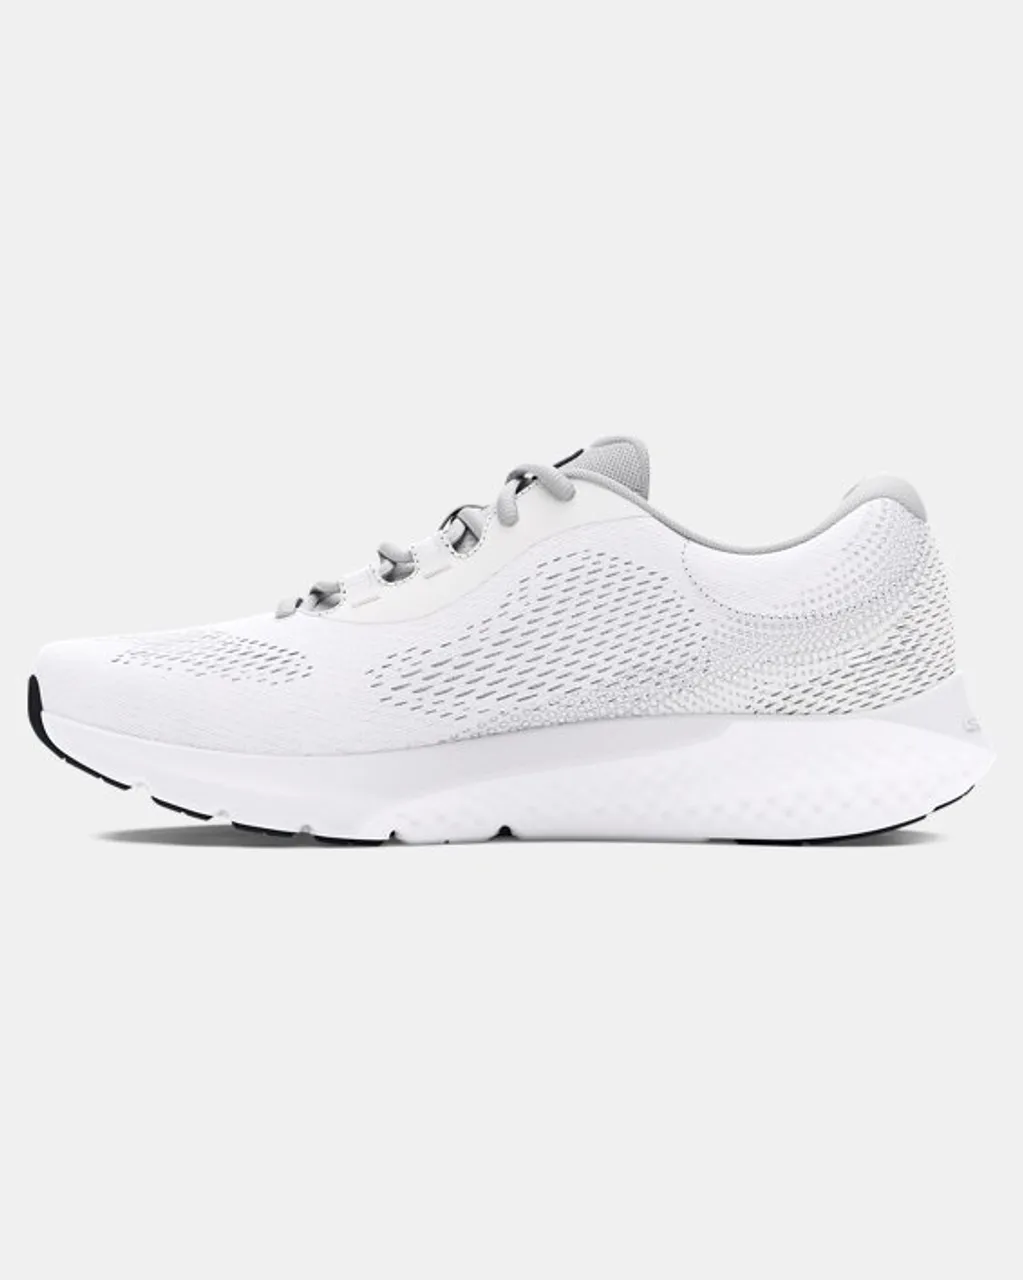 Men's  Under Armour  Rogue 4 Running Shoes White / White / Black